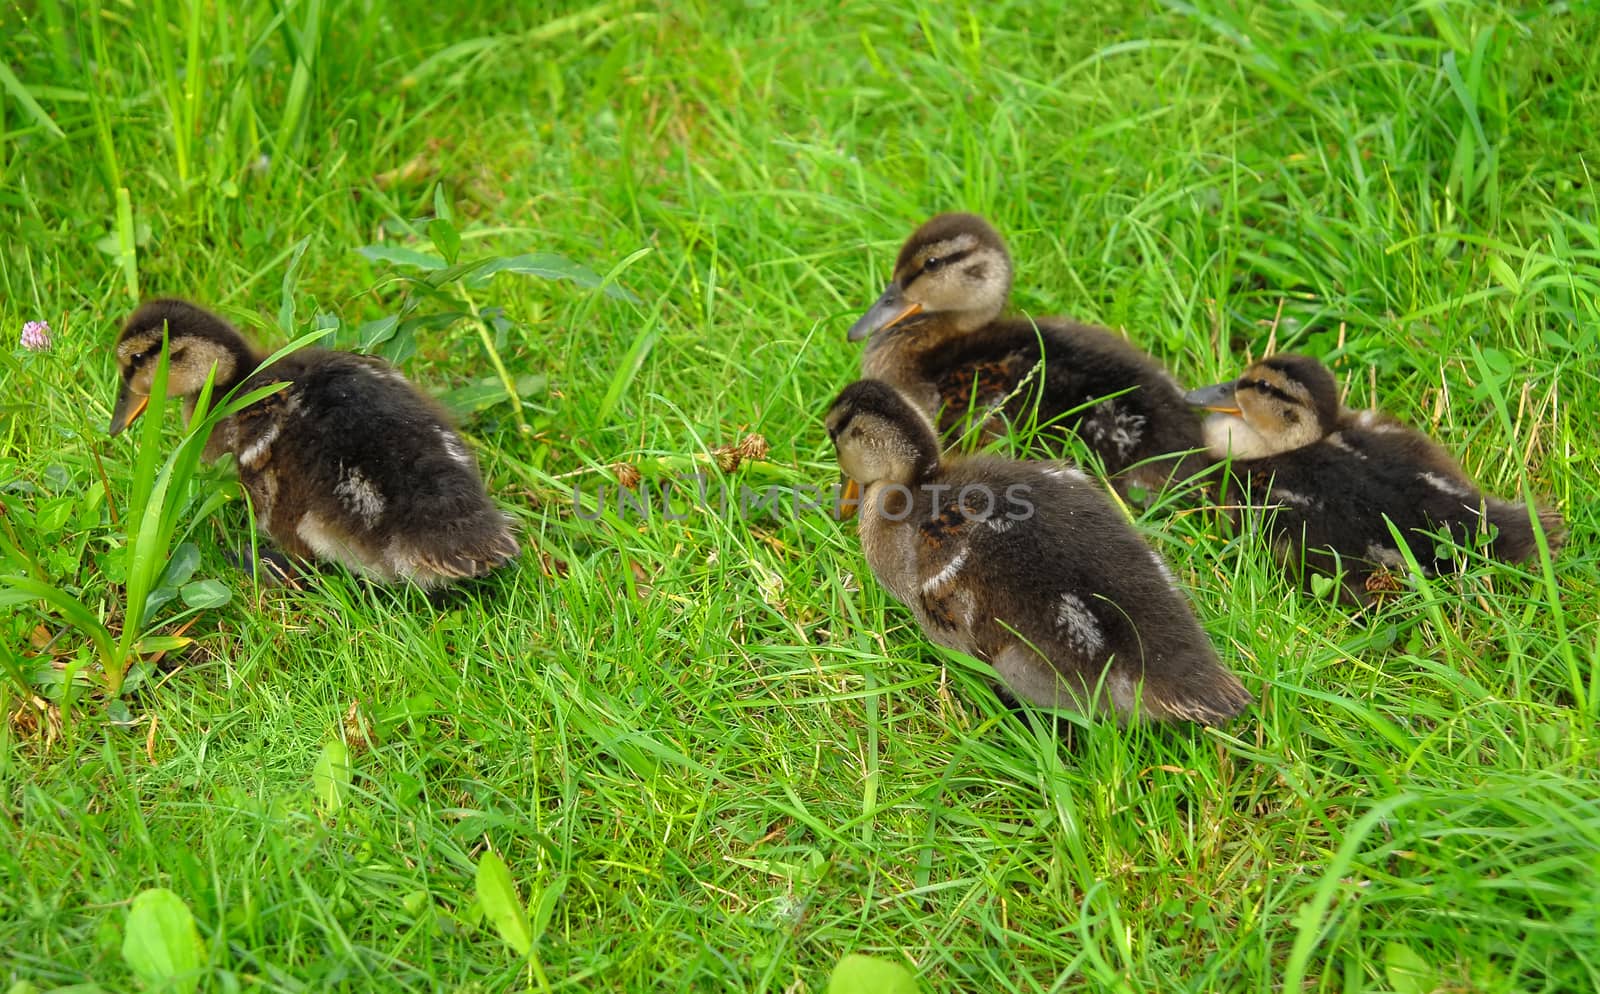 Small ducklings by Vectorex